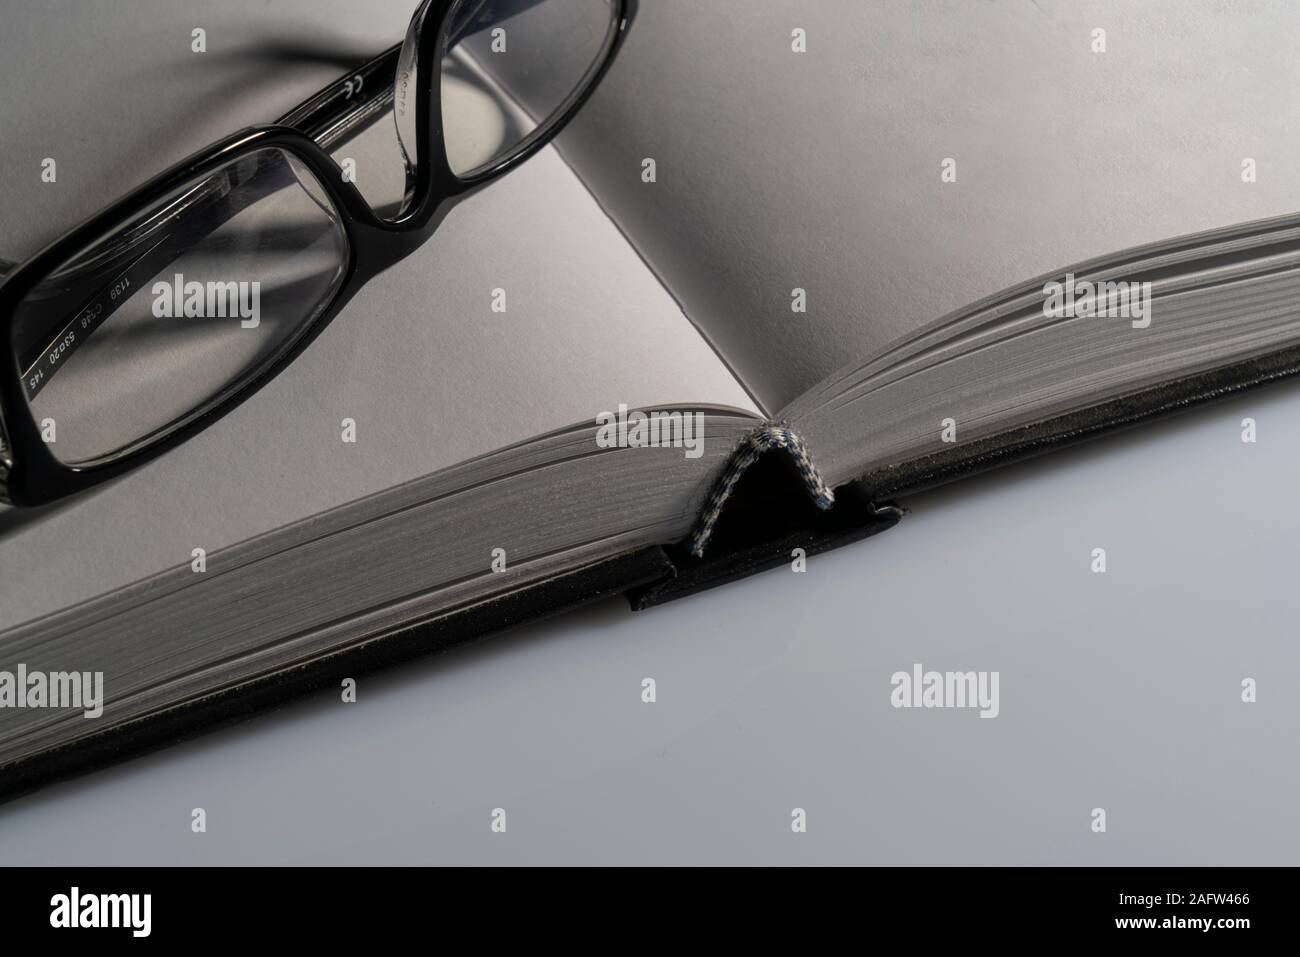 a pair of glasses on the blank pages of a book Stock Photo